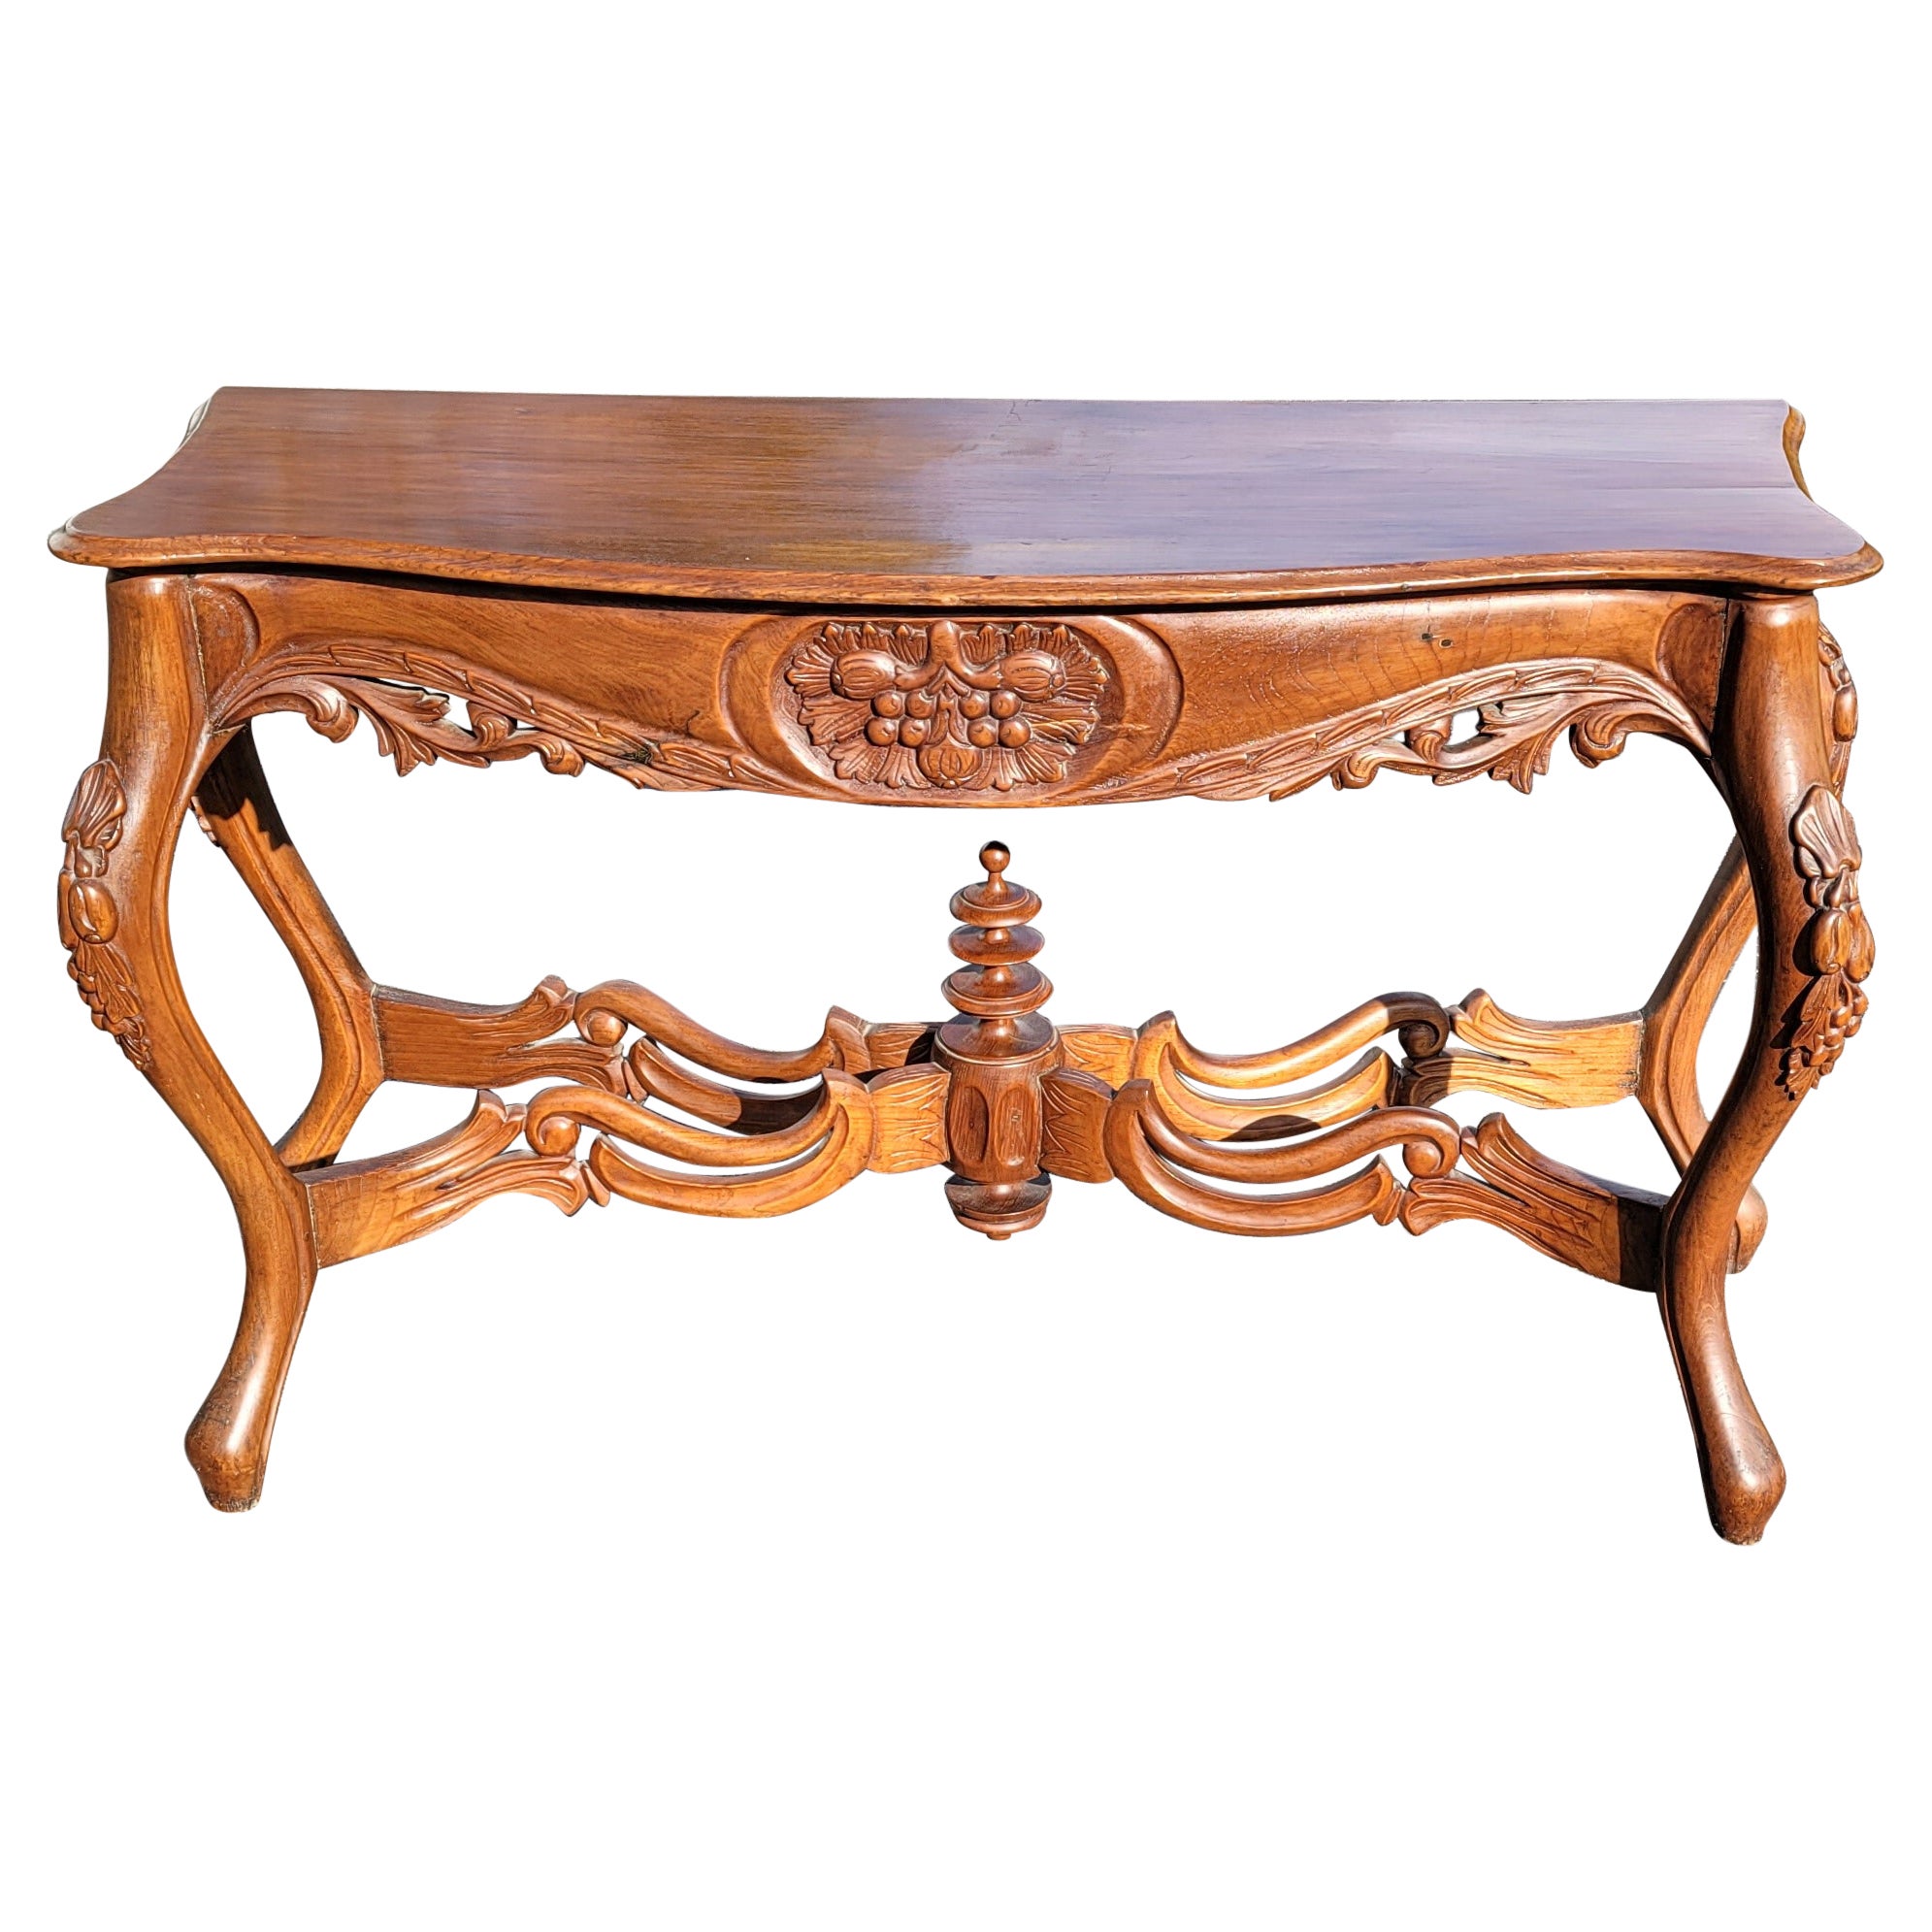 Rococo Style Carved Mahogany Serpentine Console Table